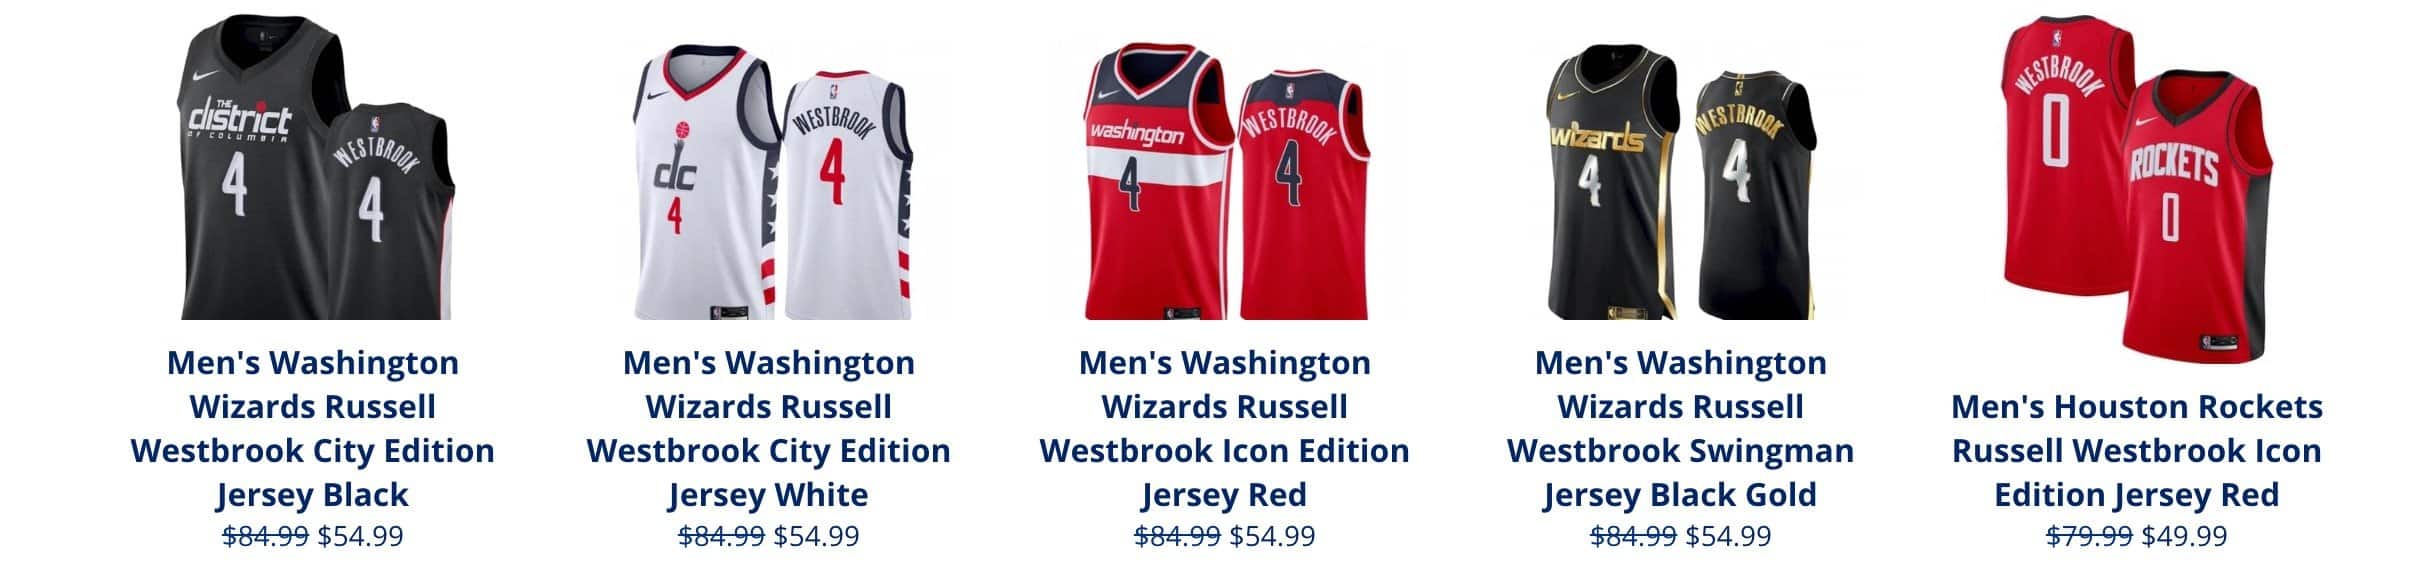 John 1 Wall Houston Rockets James 13 Harden Jersey Russell 4 Westbrook  Washington Wizards Jersey Kevin 7 Durant Basketball Jerseys - China  Basketball Jersey and Los Angeles Laker Jersey price